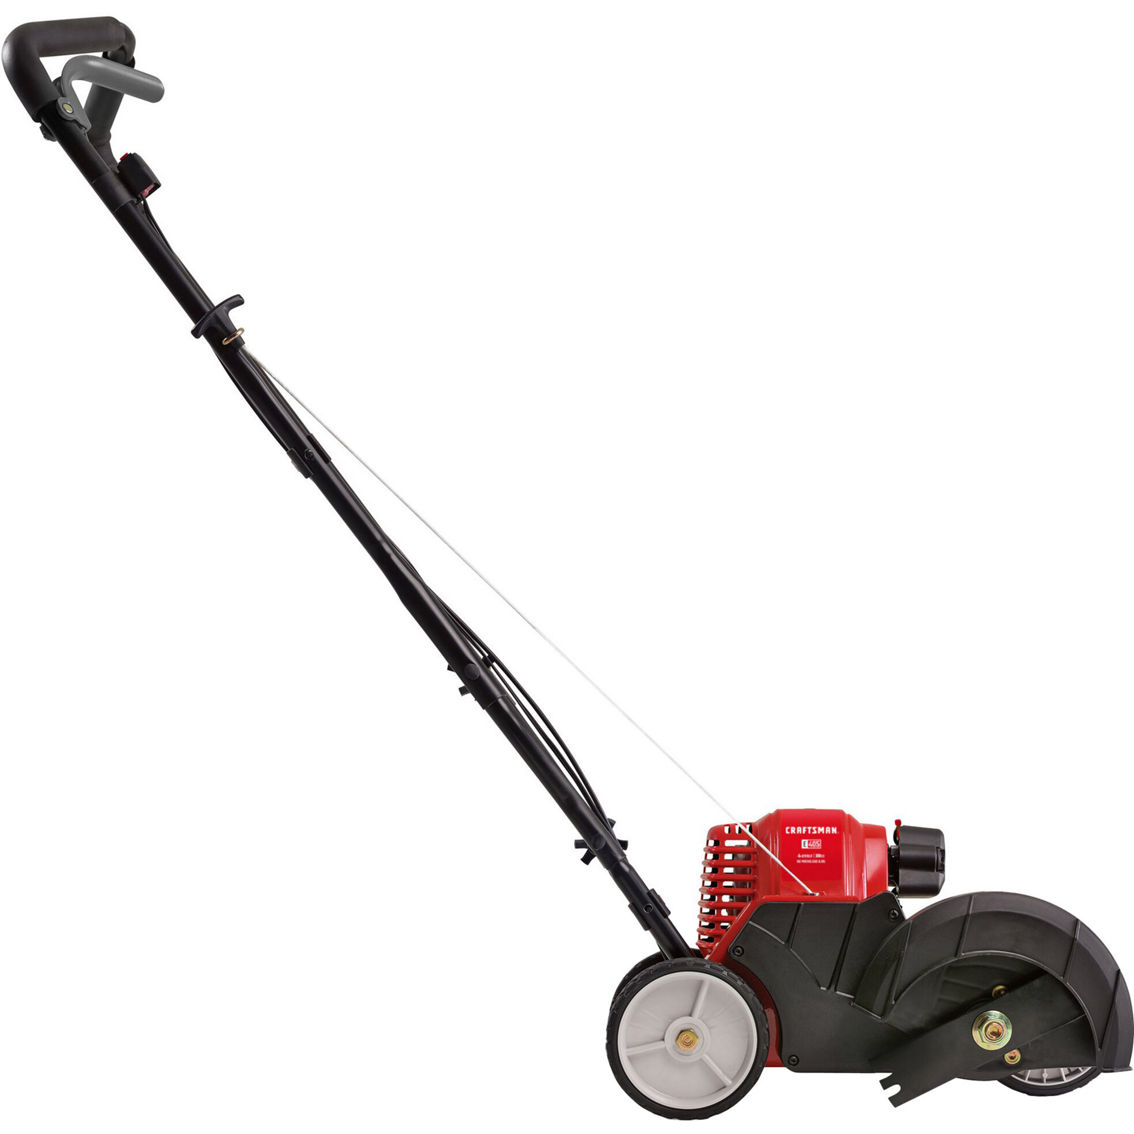 Craftsman 30cc 4-Cycle Gas Edger - Image 2 of 5